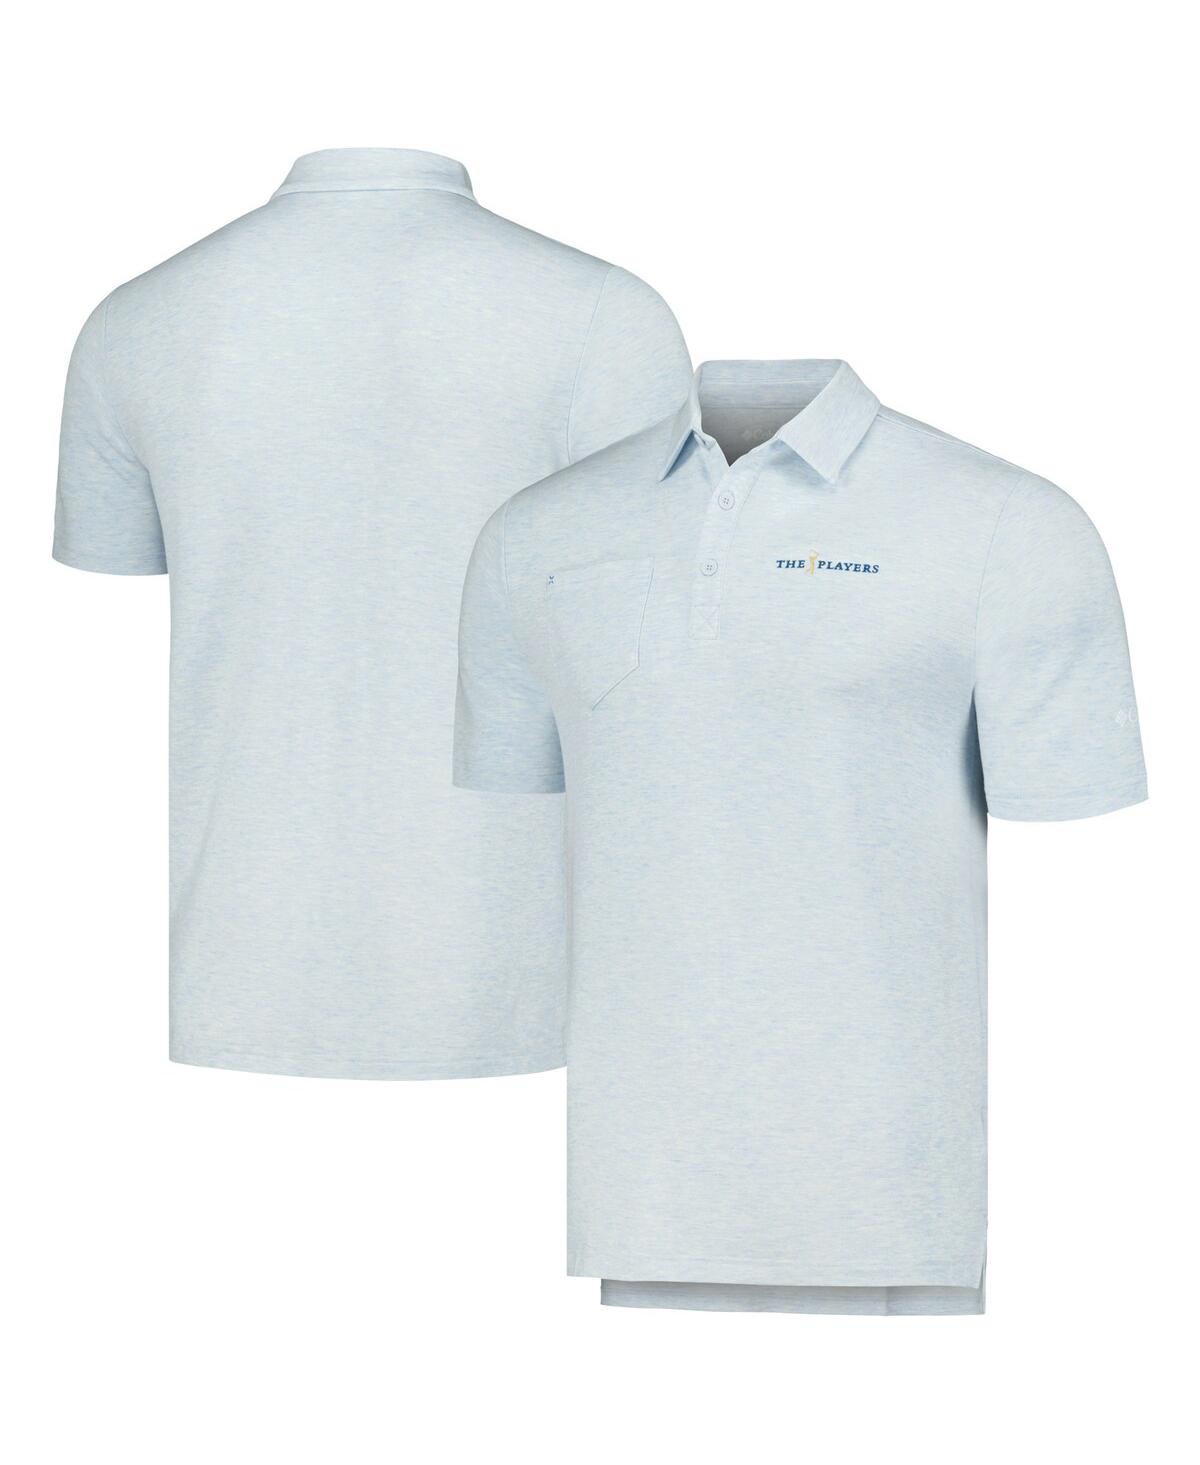 Shop Columbia Men's Light Blue The Players Omni-shade Clubhead Polo